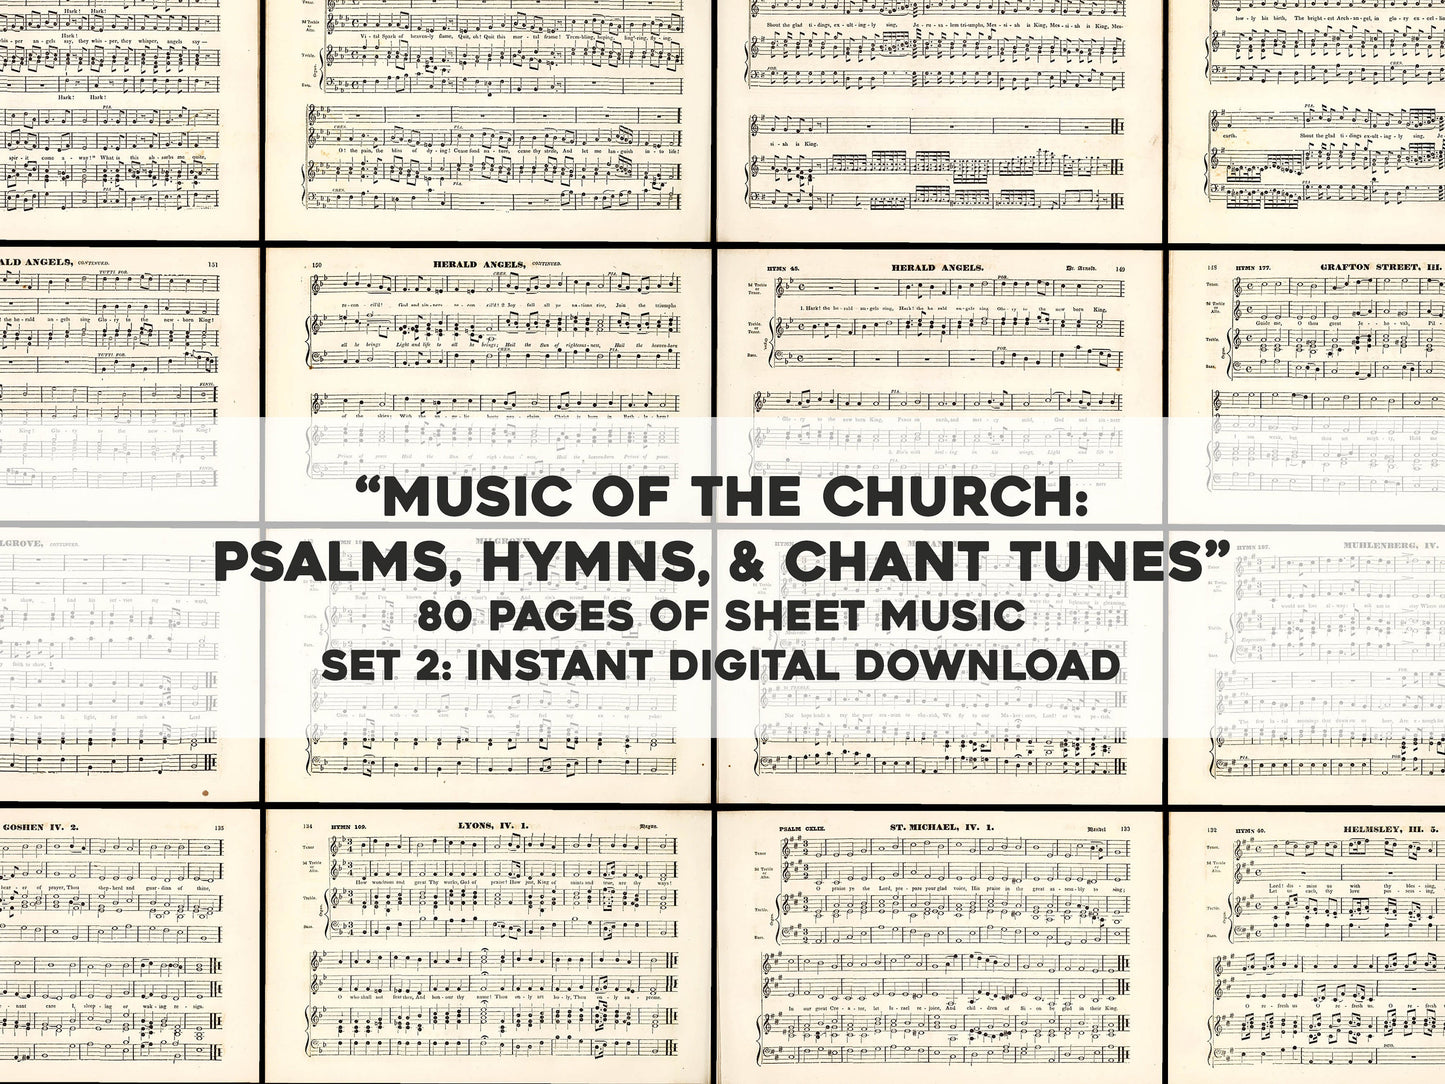 Music of the Church: Songs Hymns & Chant Tunes Set 2 [80 Images]